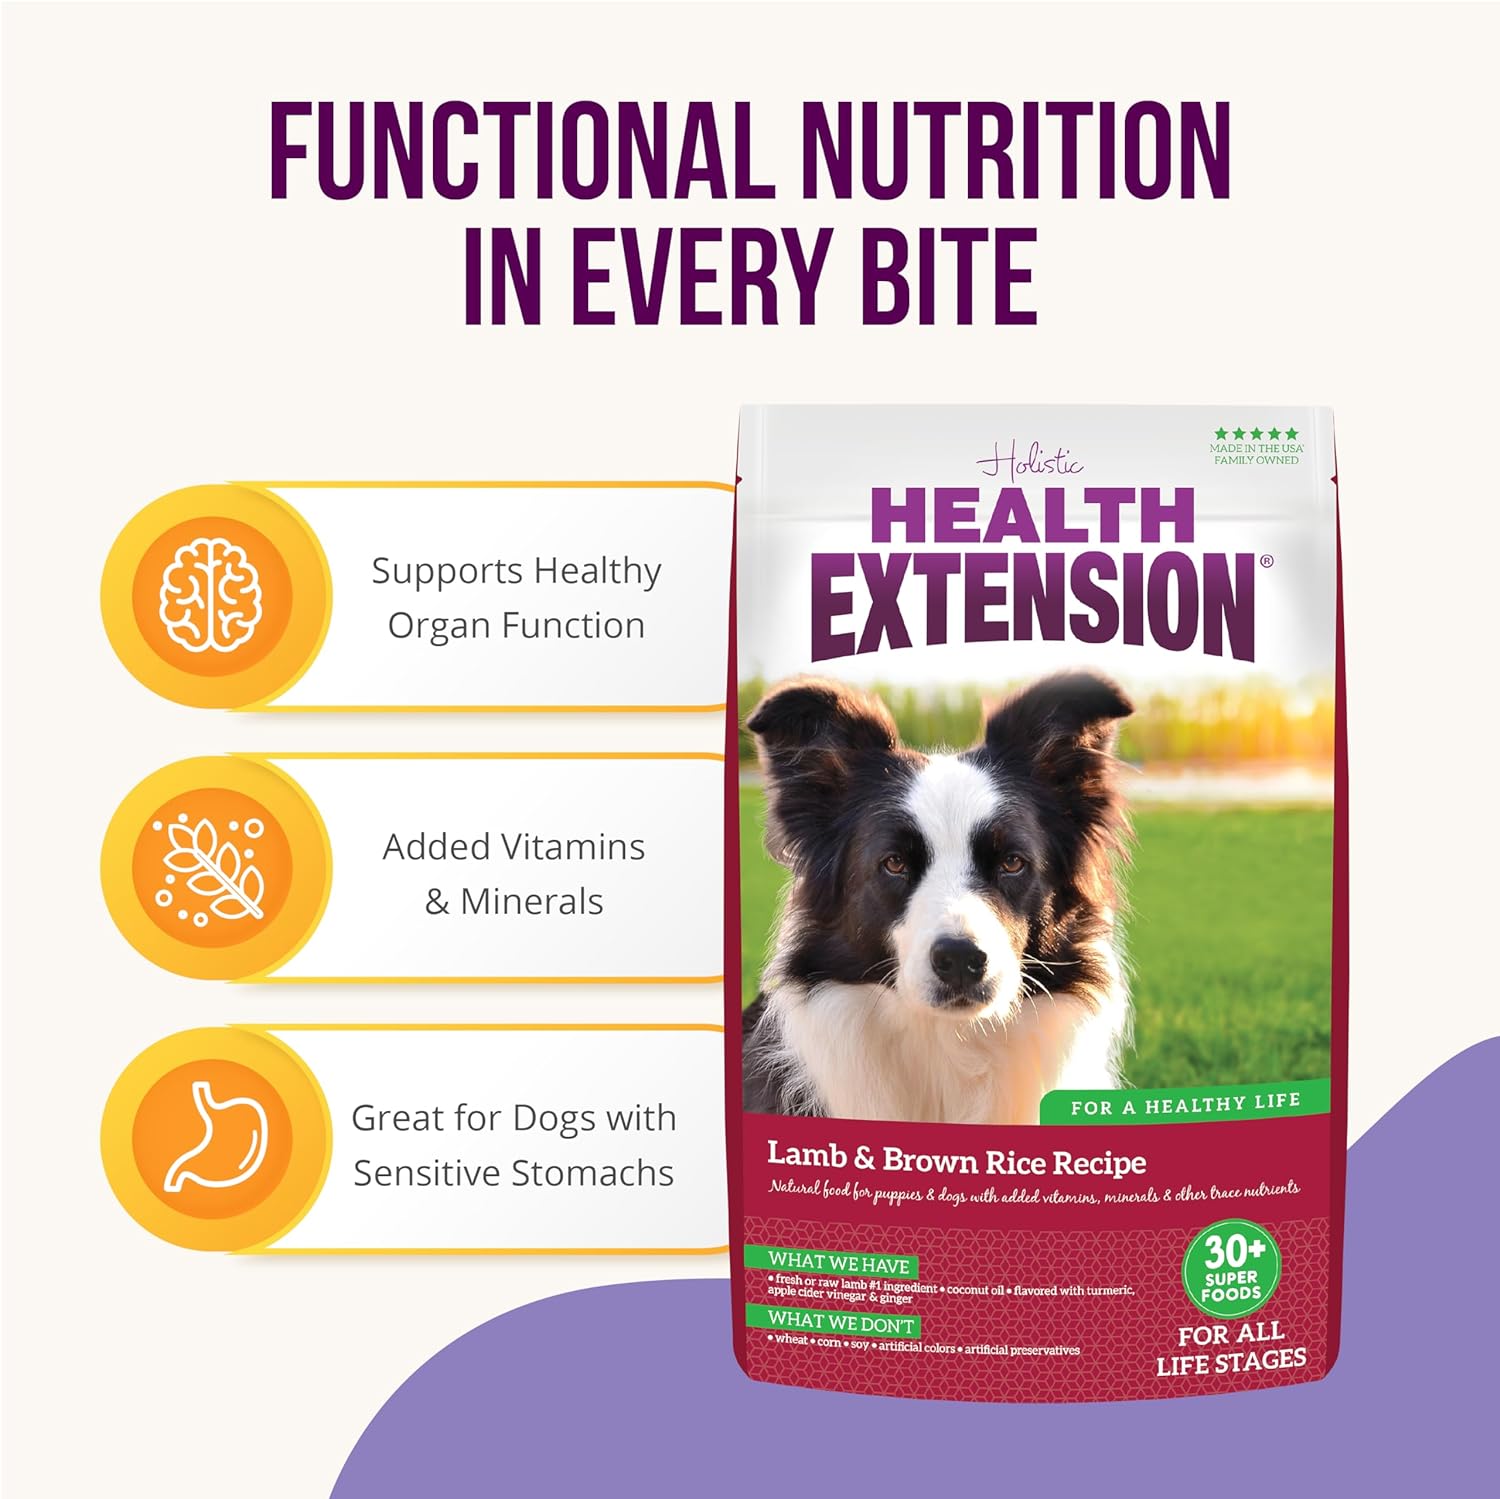 Health Extension Dry Dog Food, Natural Food for All Puppies & Dogs with Added Vitamins & Mineral, Lamb & Brown Rice Recipe (15 Pound / 9.07 Kg) : Pet Supplies